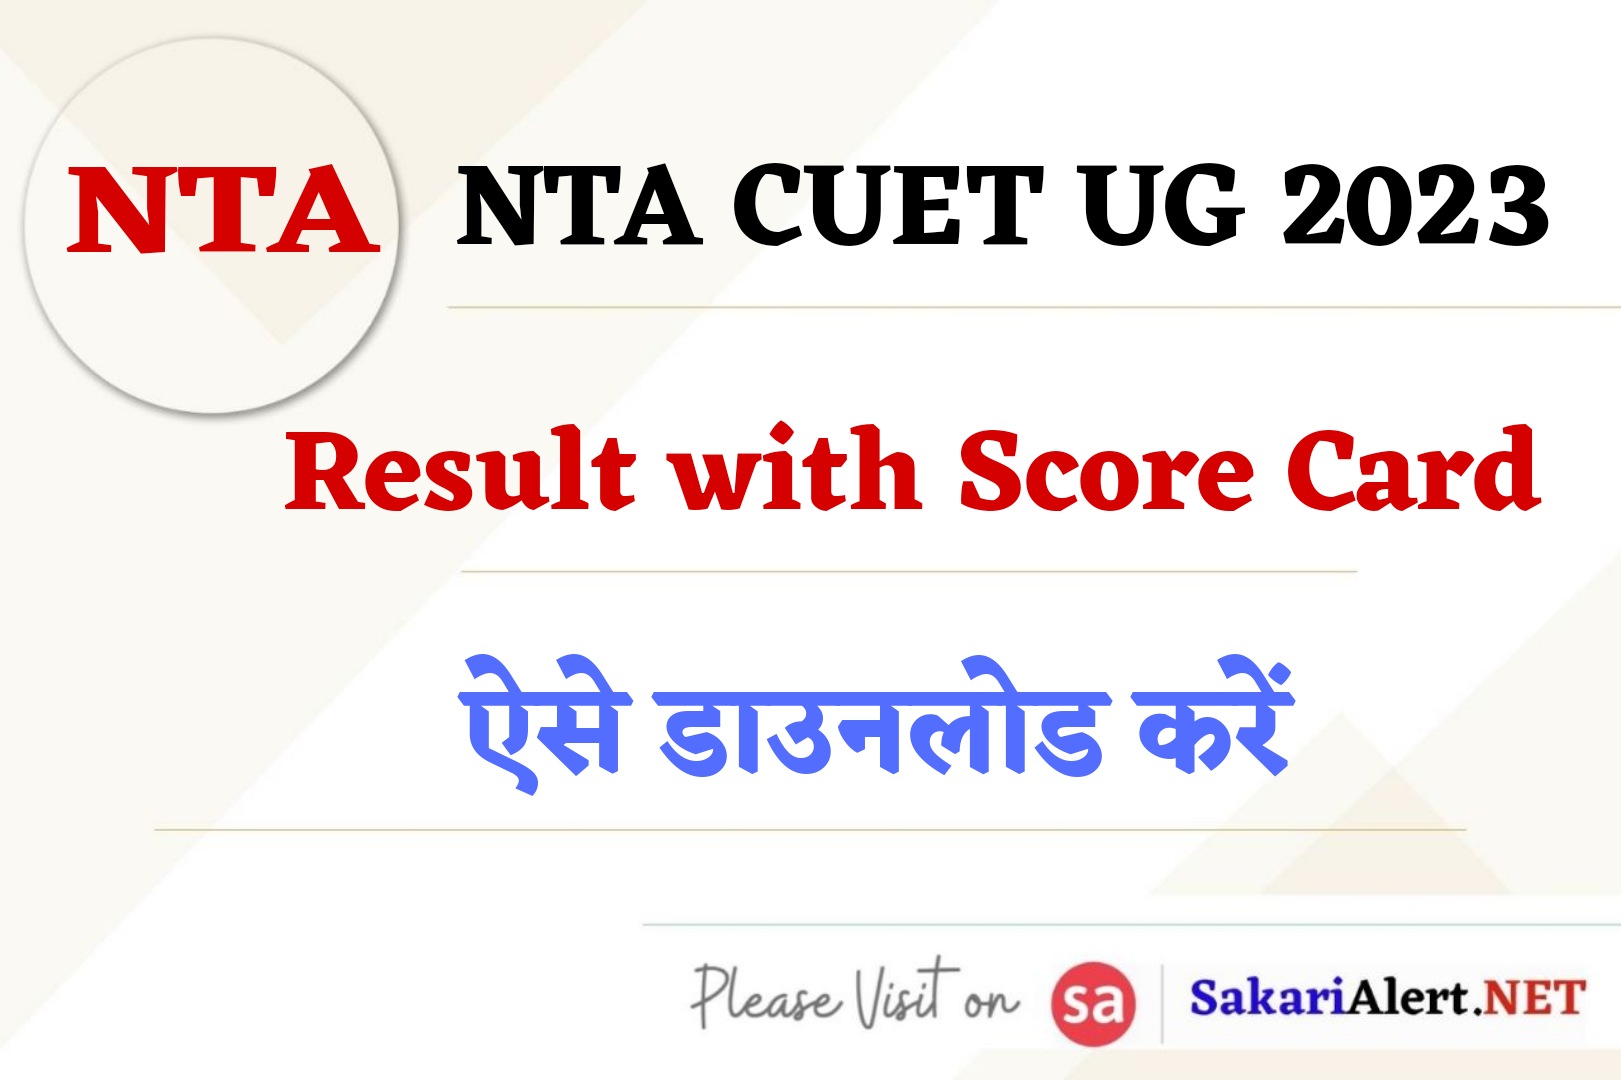 NTA CUET UG 2023 Result with Score Card